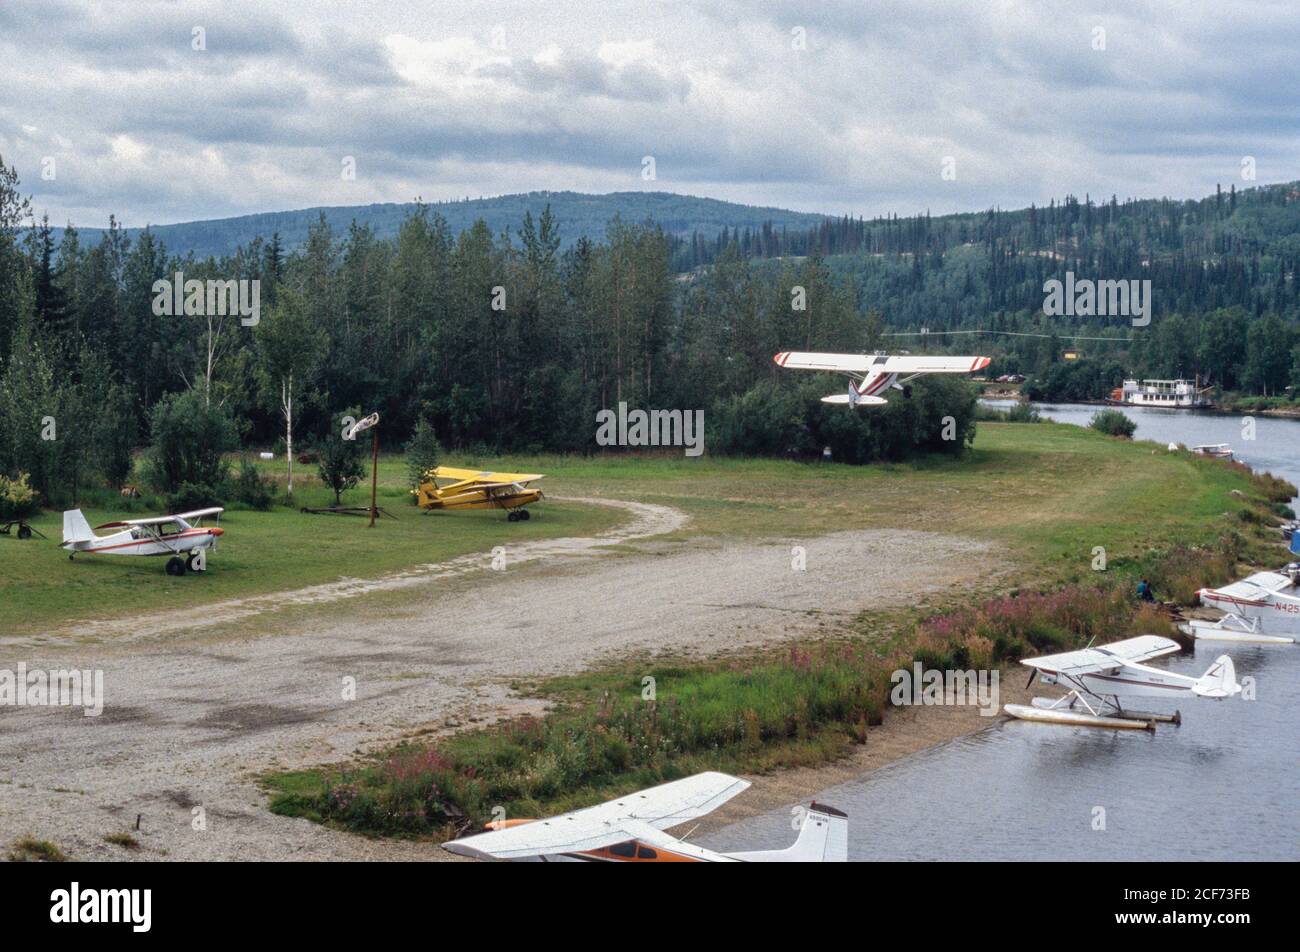 Fairbanks, Alaska, Tanana River.  Airplanes in your Front Yard: one taking off.  Seaplanes in the Tanana River. Stock Photo